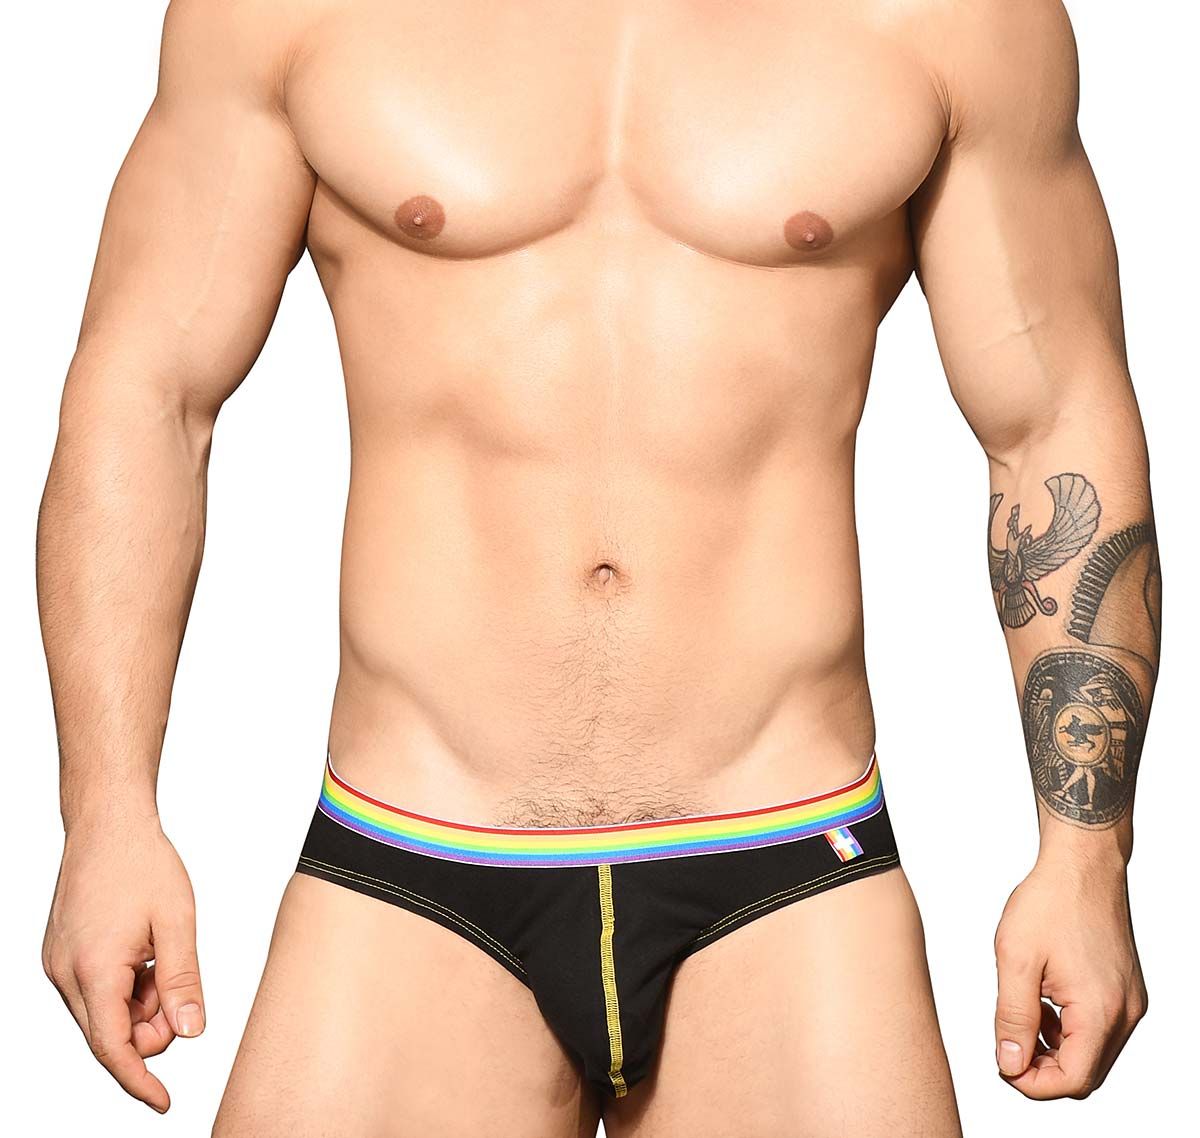 Andrew Christian 3 Paquet Slips BOY BRIEF UNICORN 3-PACK w/Almost Naked 91702, rouge/bleu/noir